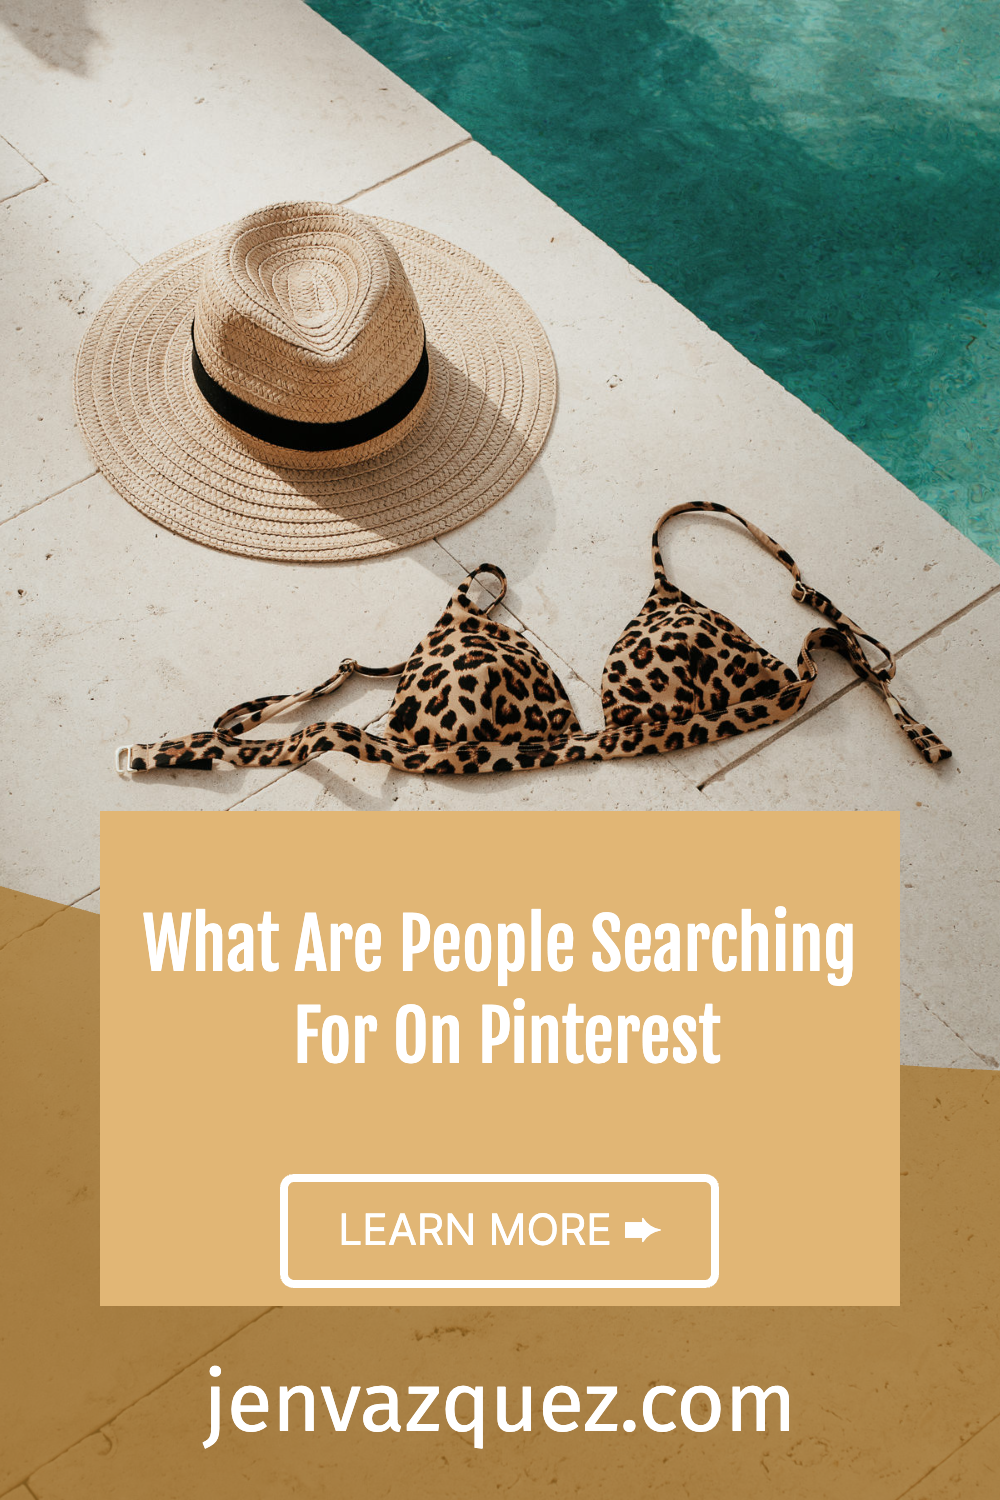 What Are People Searching For On Pinterest by Jen Vazquez Media